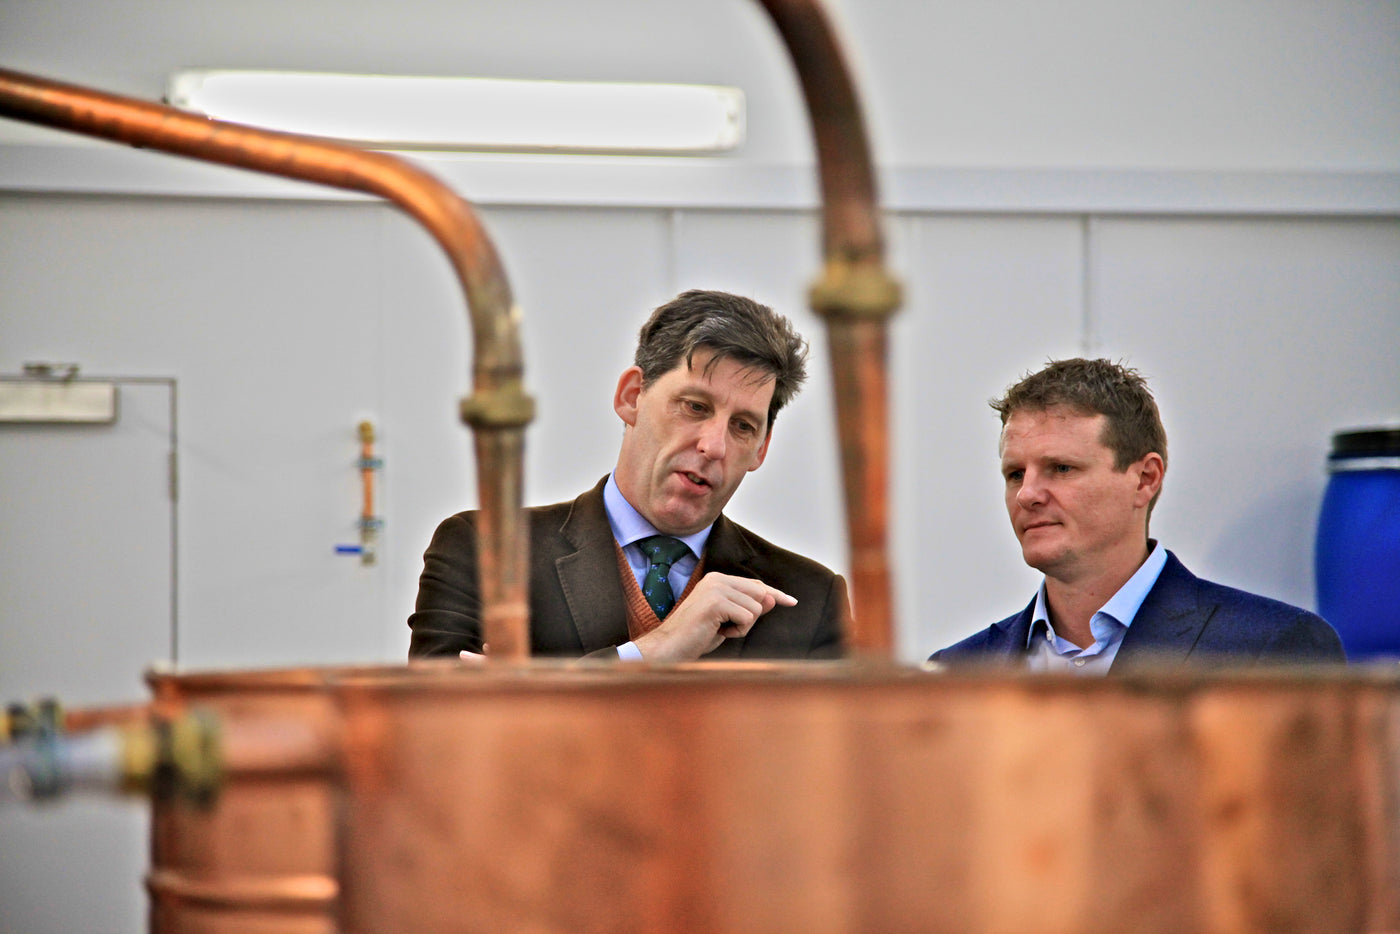 People at stills in the gin manfacturing area, Orkney Distillery